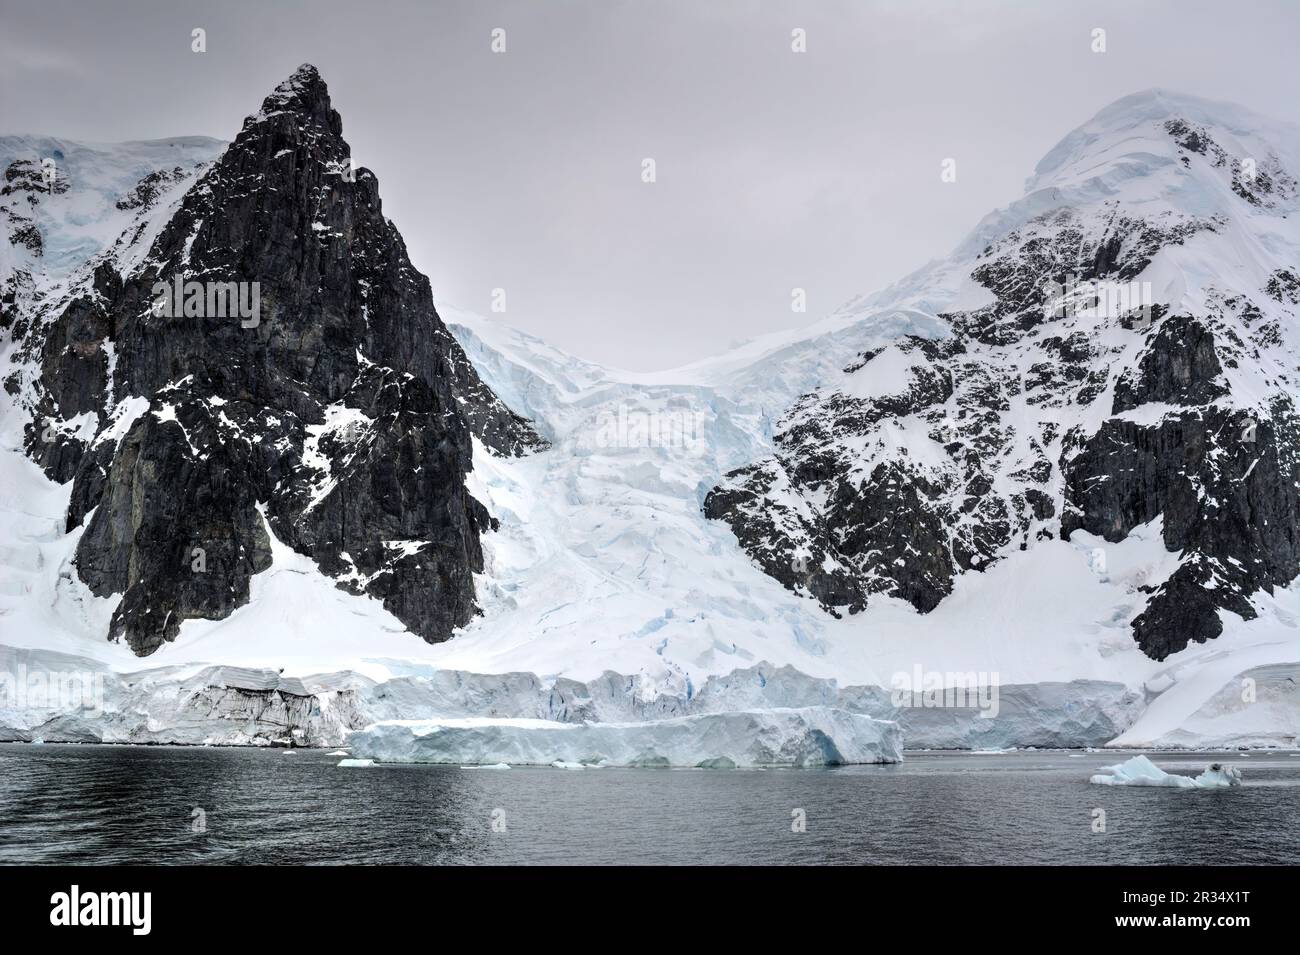 Snow-capped mountains and rocks of Antarctica Stock Photo